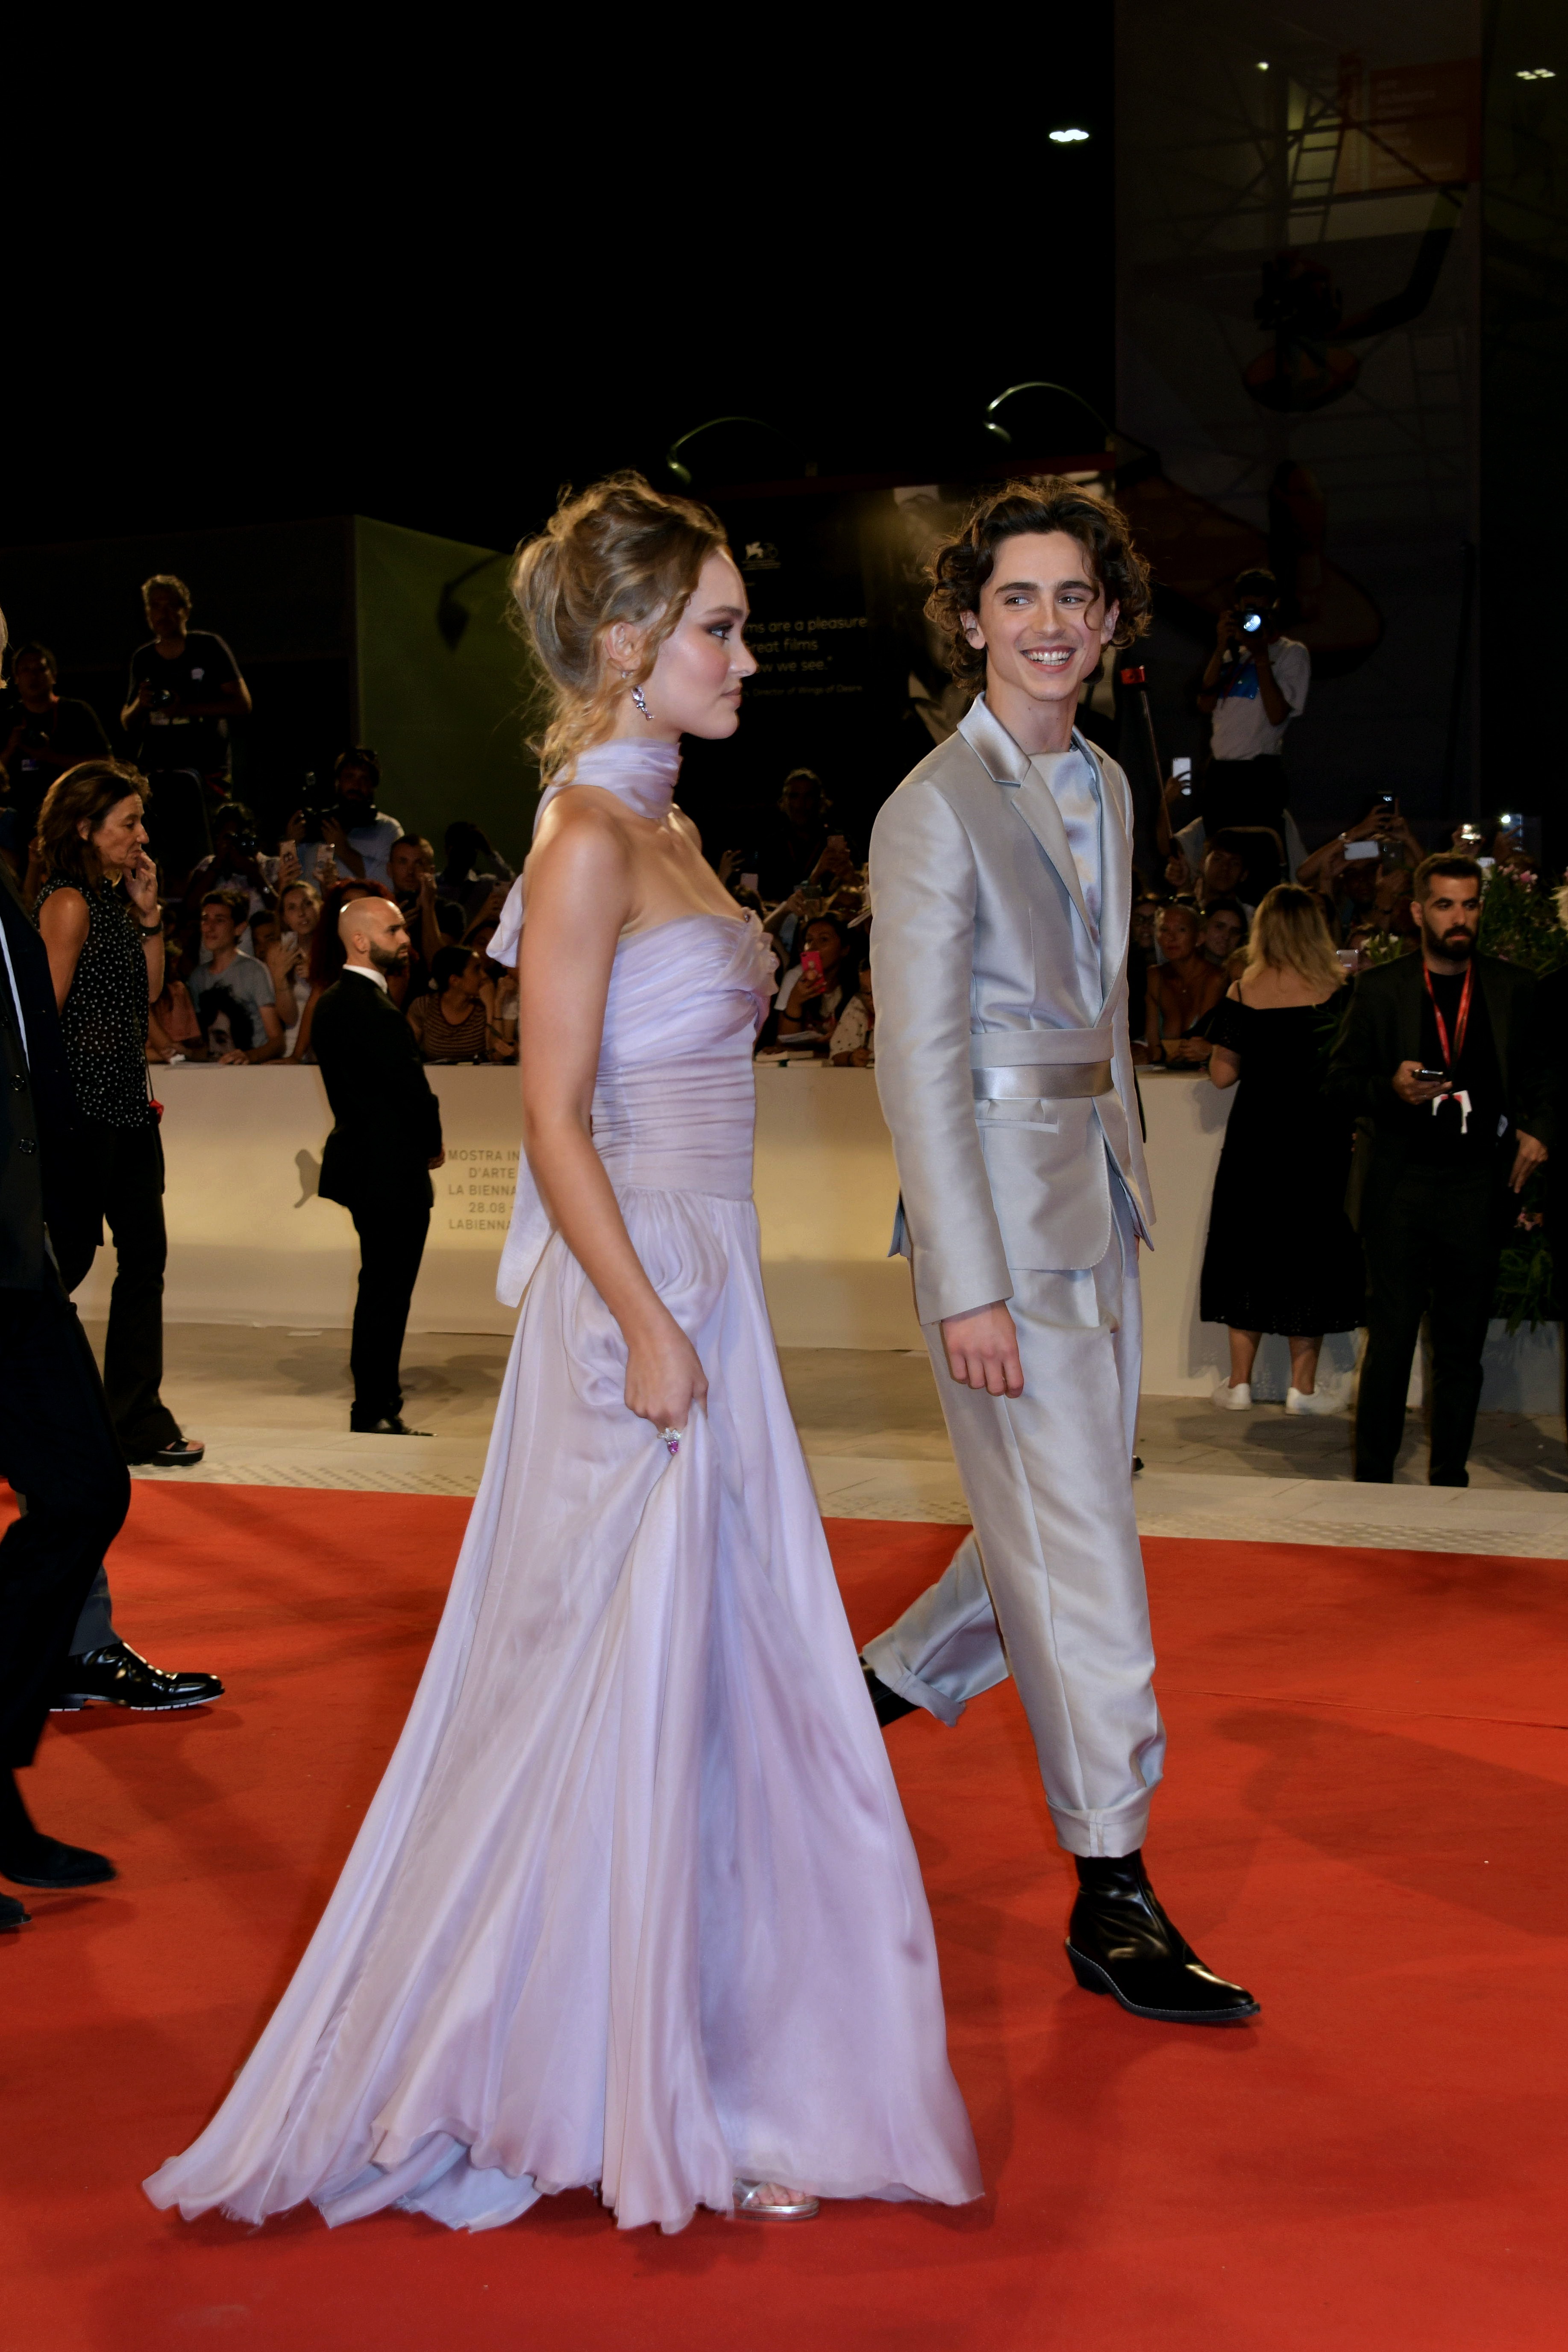 Kylie Jenner and Timothée Chalamet match in black at red carpet event amid  romance